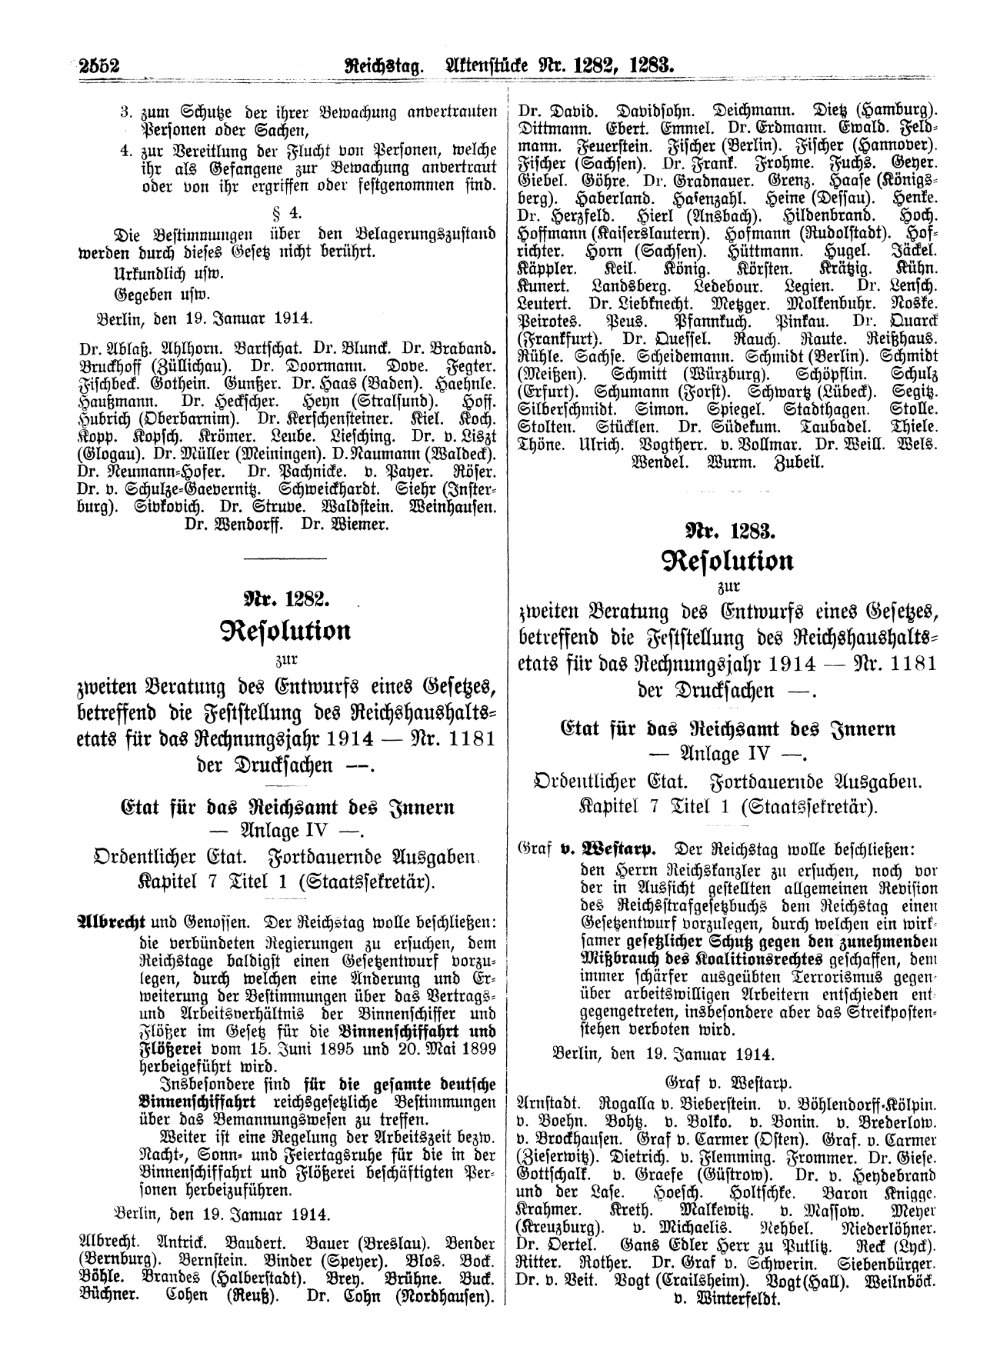 Scan of page 2552